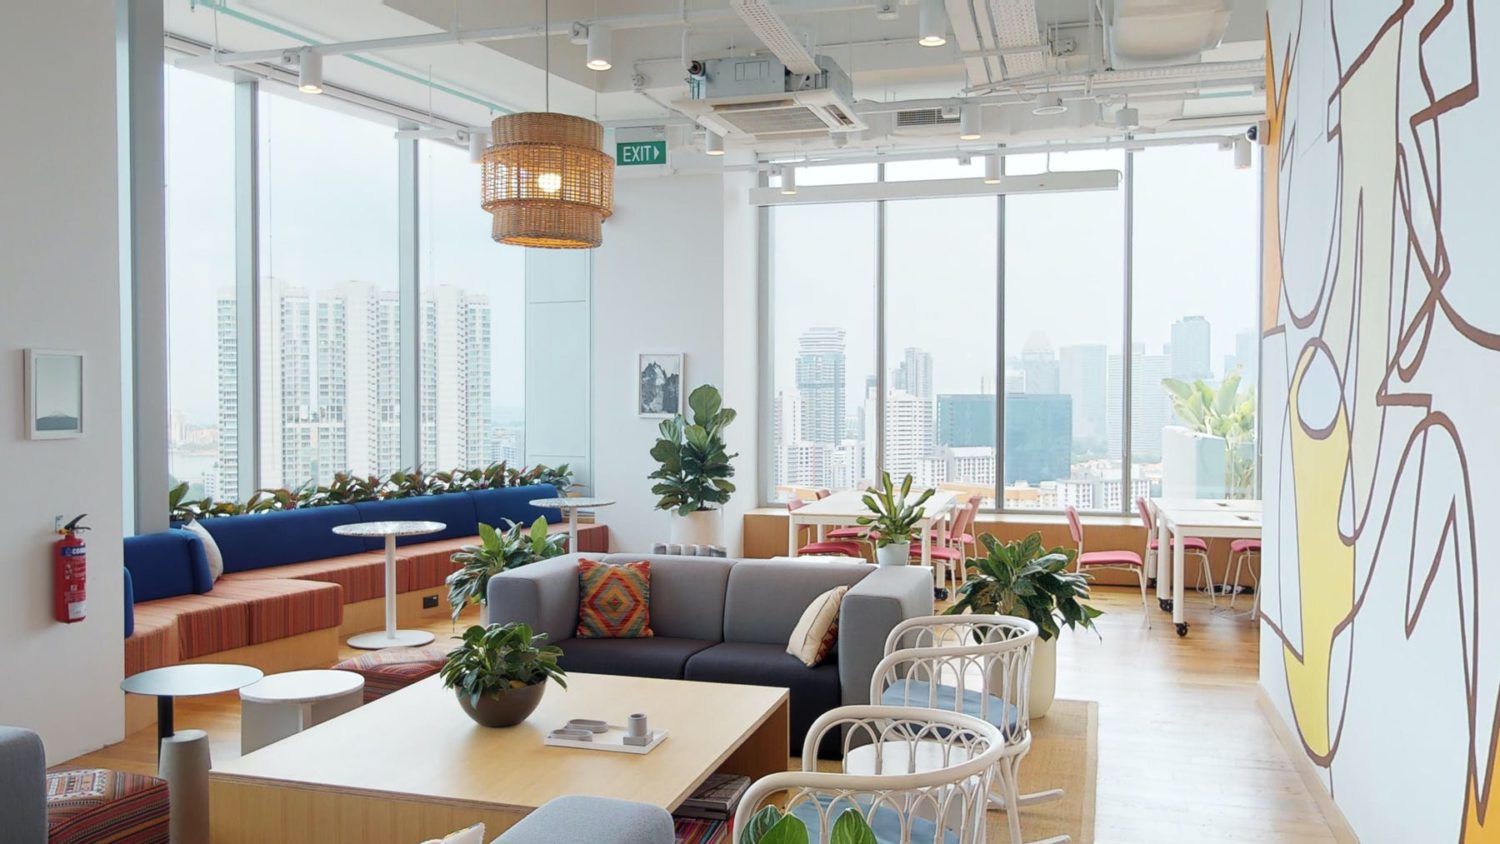 shared offices in Singapore including hot desks and coworking spaces